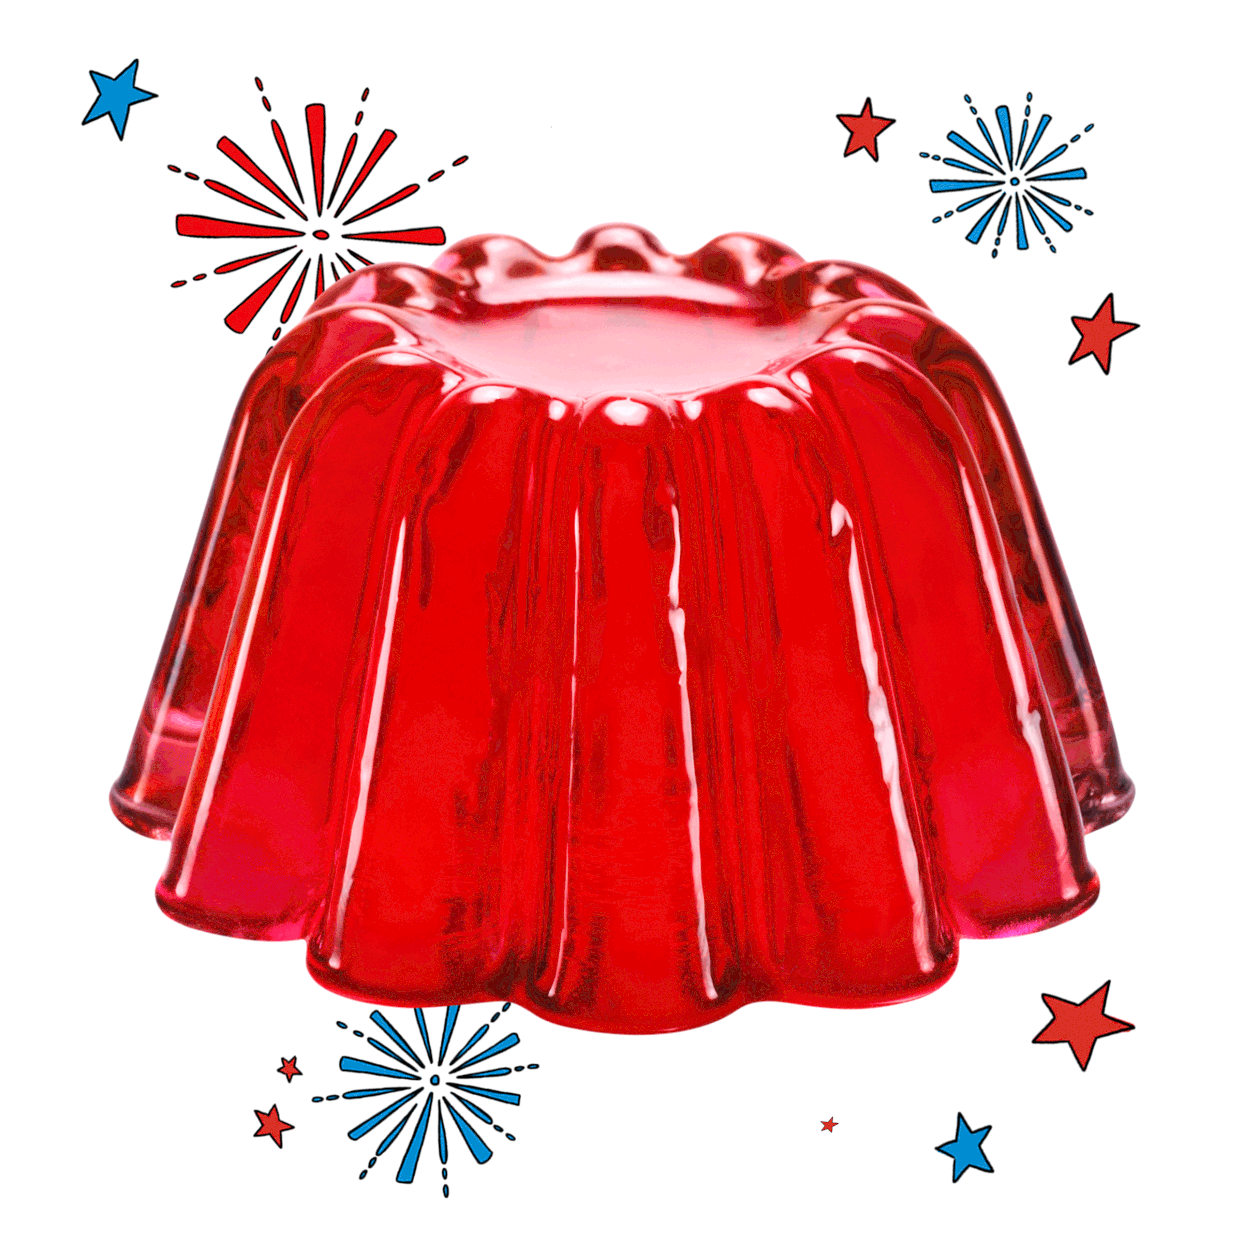 Red Jell-O with fireworks and stars bursting in the background